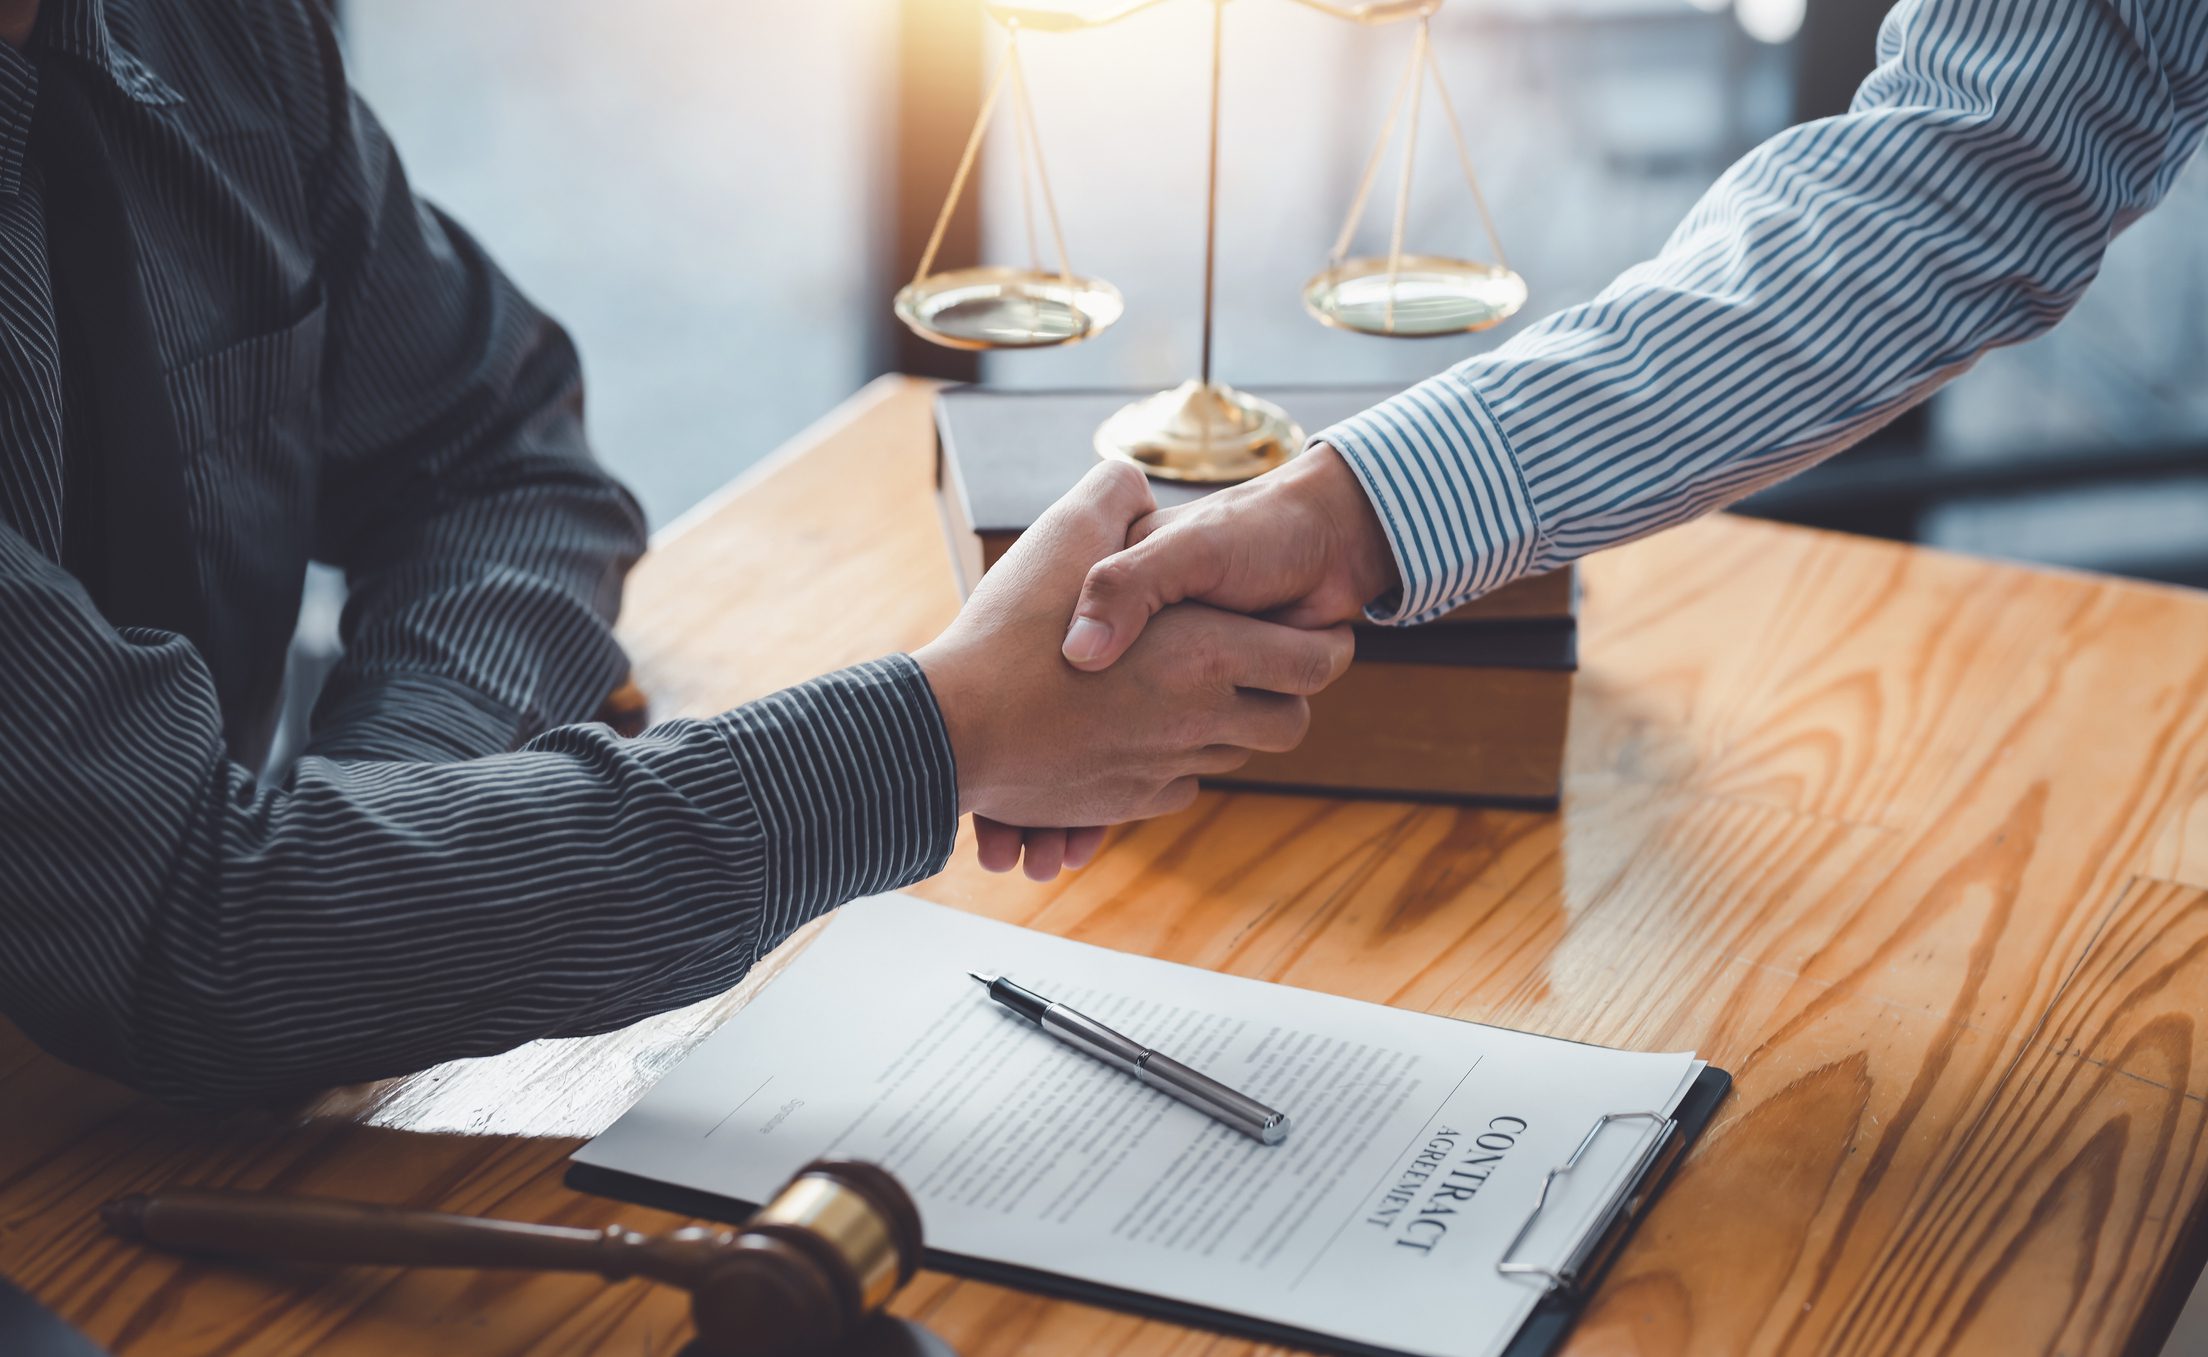 How Creating Content Can Help Law Firms Connect with Clients 